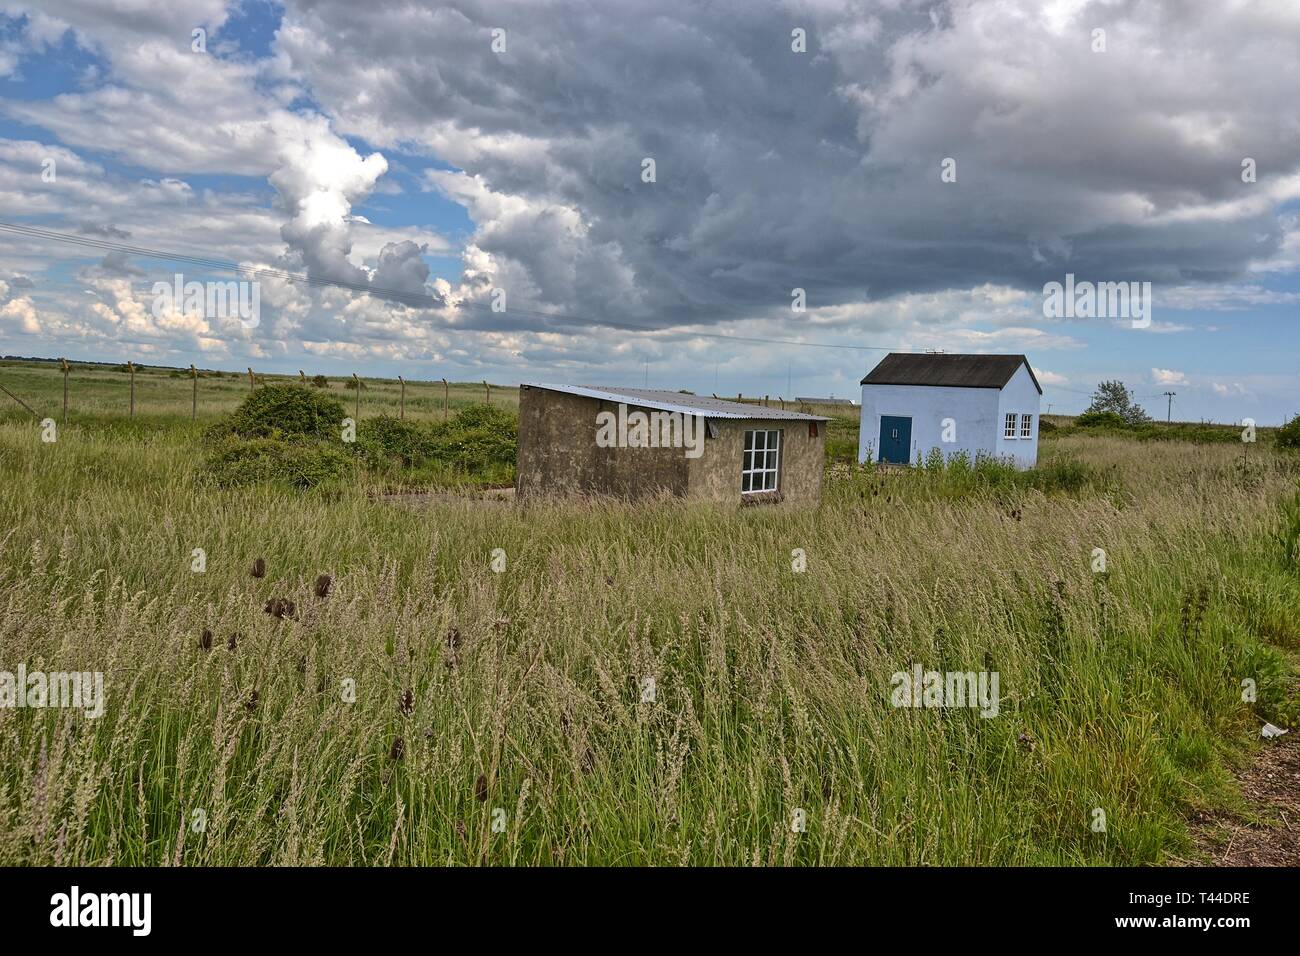 Former atomic bomb and radar testing site at Orford Ness, Orford, Suffolk, UK. Now a wetland landscape and nature reserve. HDR effect applied. Stock Photo